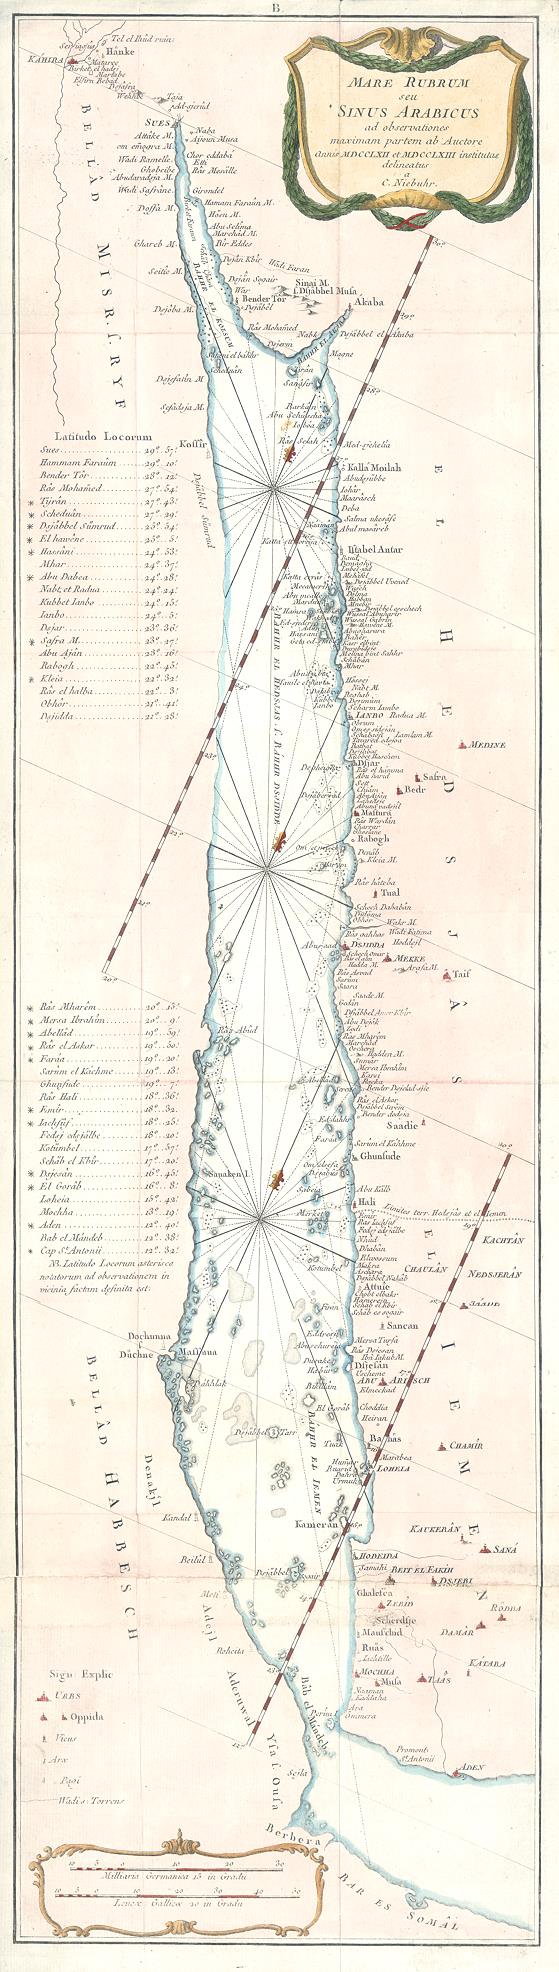 The Red Sea, by Niebuhr, 1772